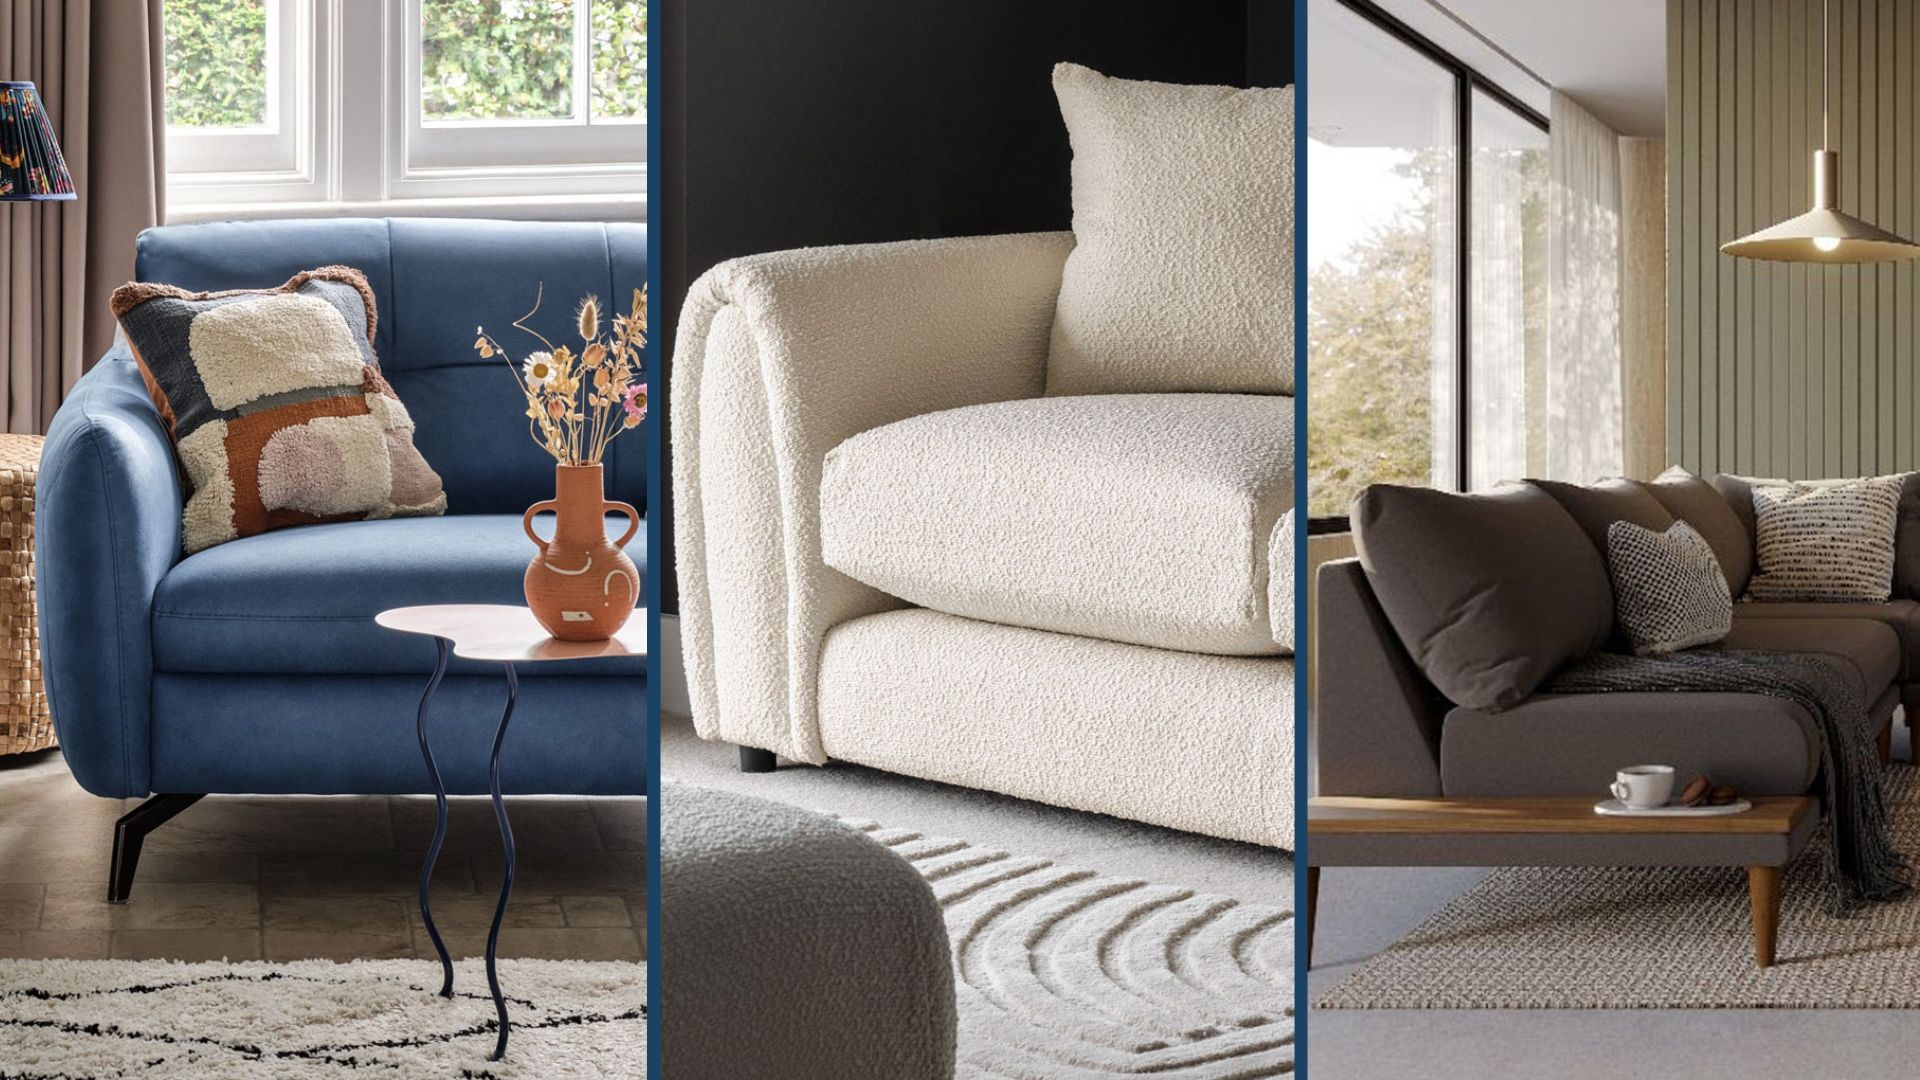 Exclusive Sofa Brands & Styles at DFS